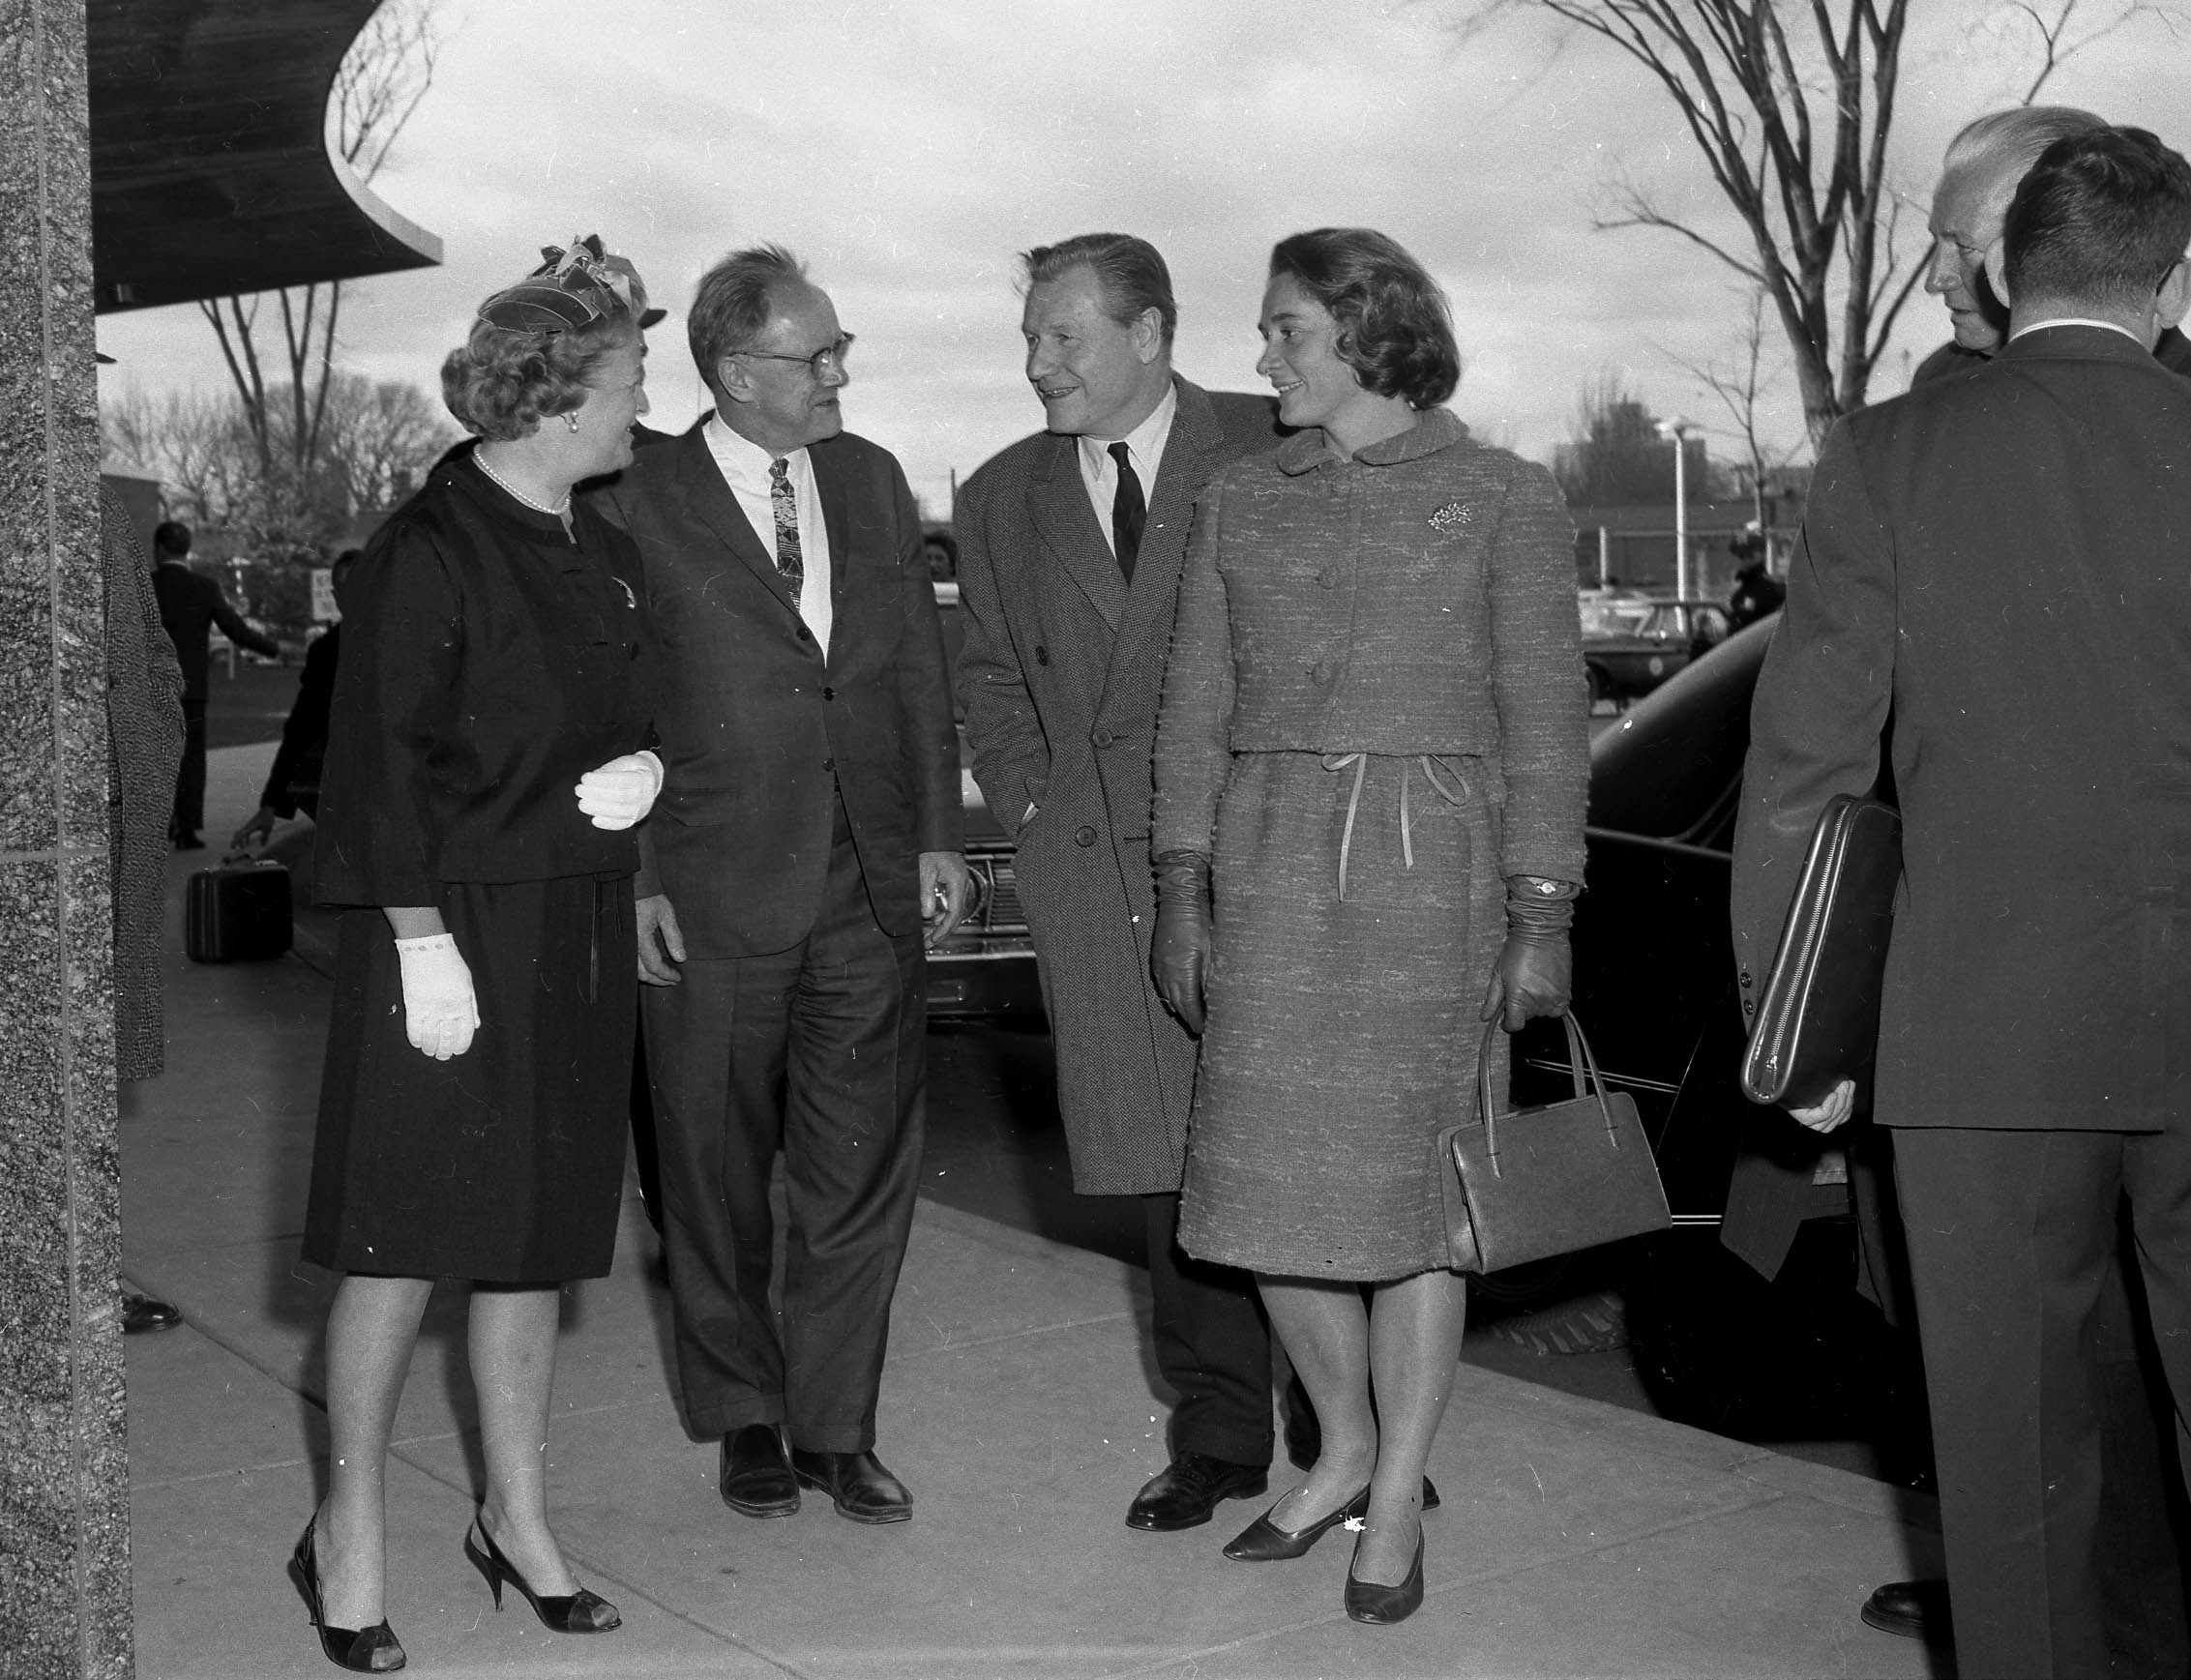 Drs. Cookie and Jake Jacobsen meet with NY Governor Nelson Rockefeller and his wife, Happy, at the newly opened Upstate University Hospital, 1965.